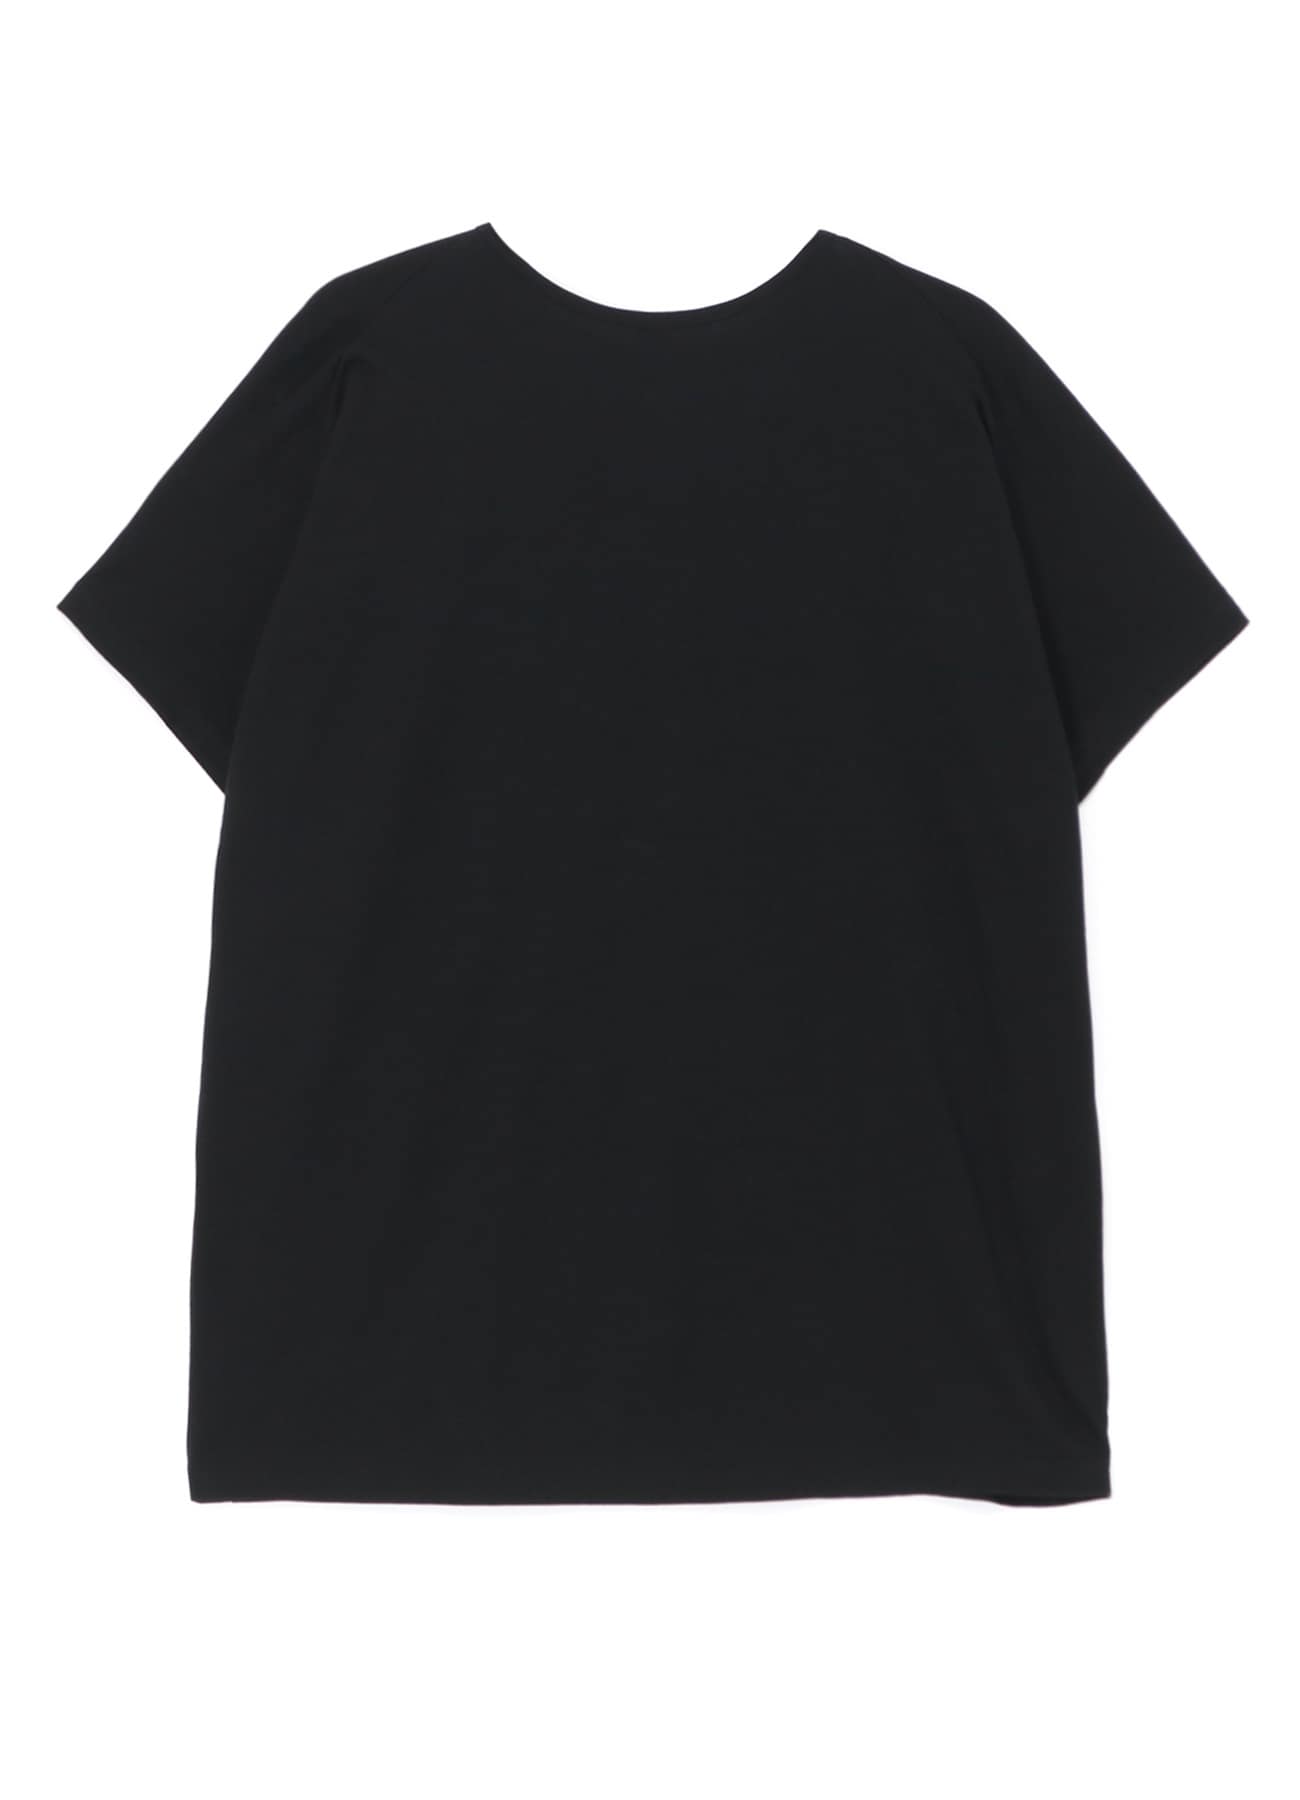 Y's KHADI COLLECTION]FLOWER PRINTED BIG T-SHIRT(S Black): Y's｜THE 